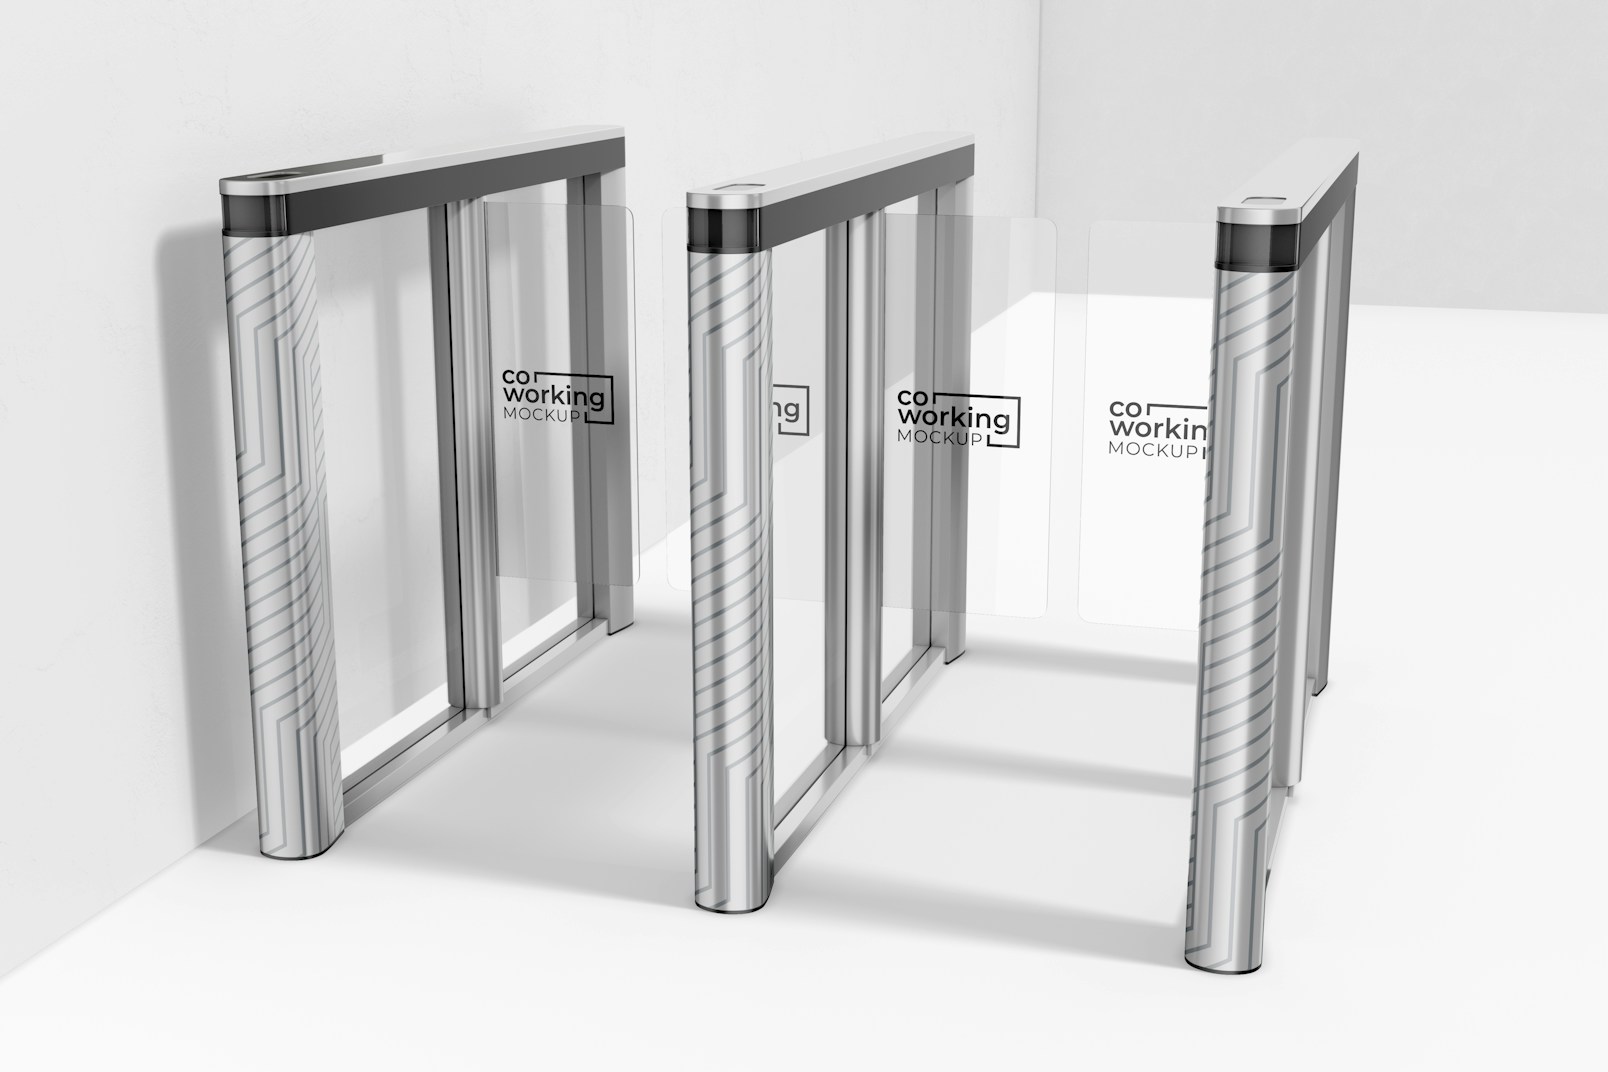 Access Control Turnstile Mockup, High Angle View